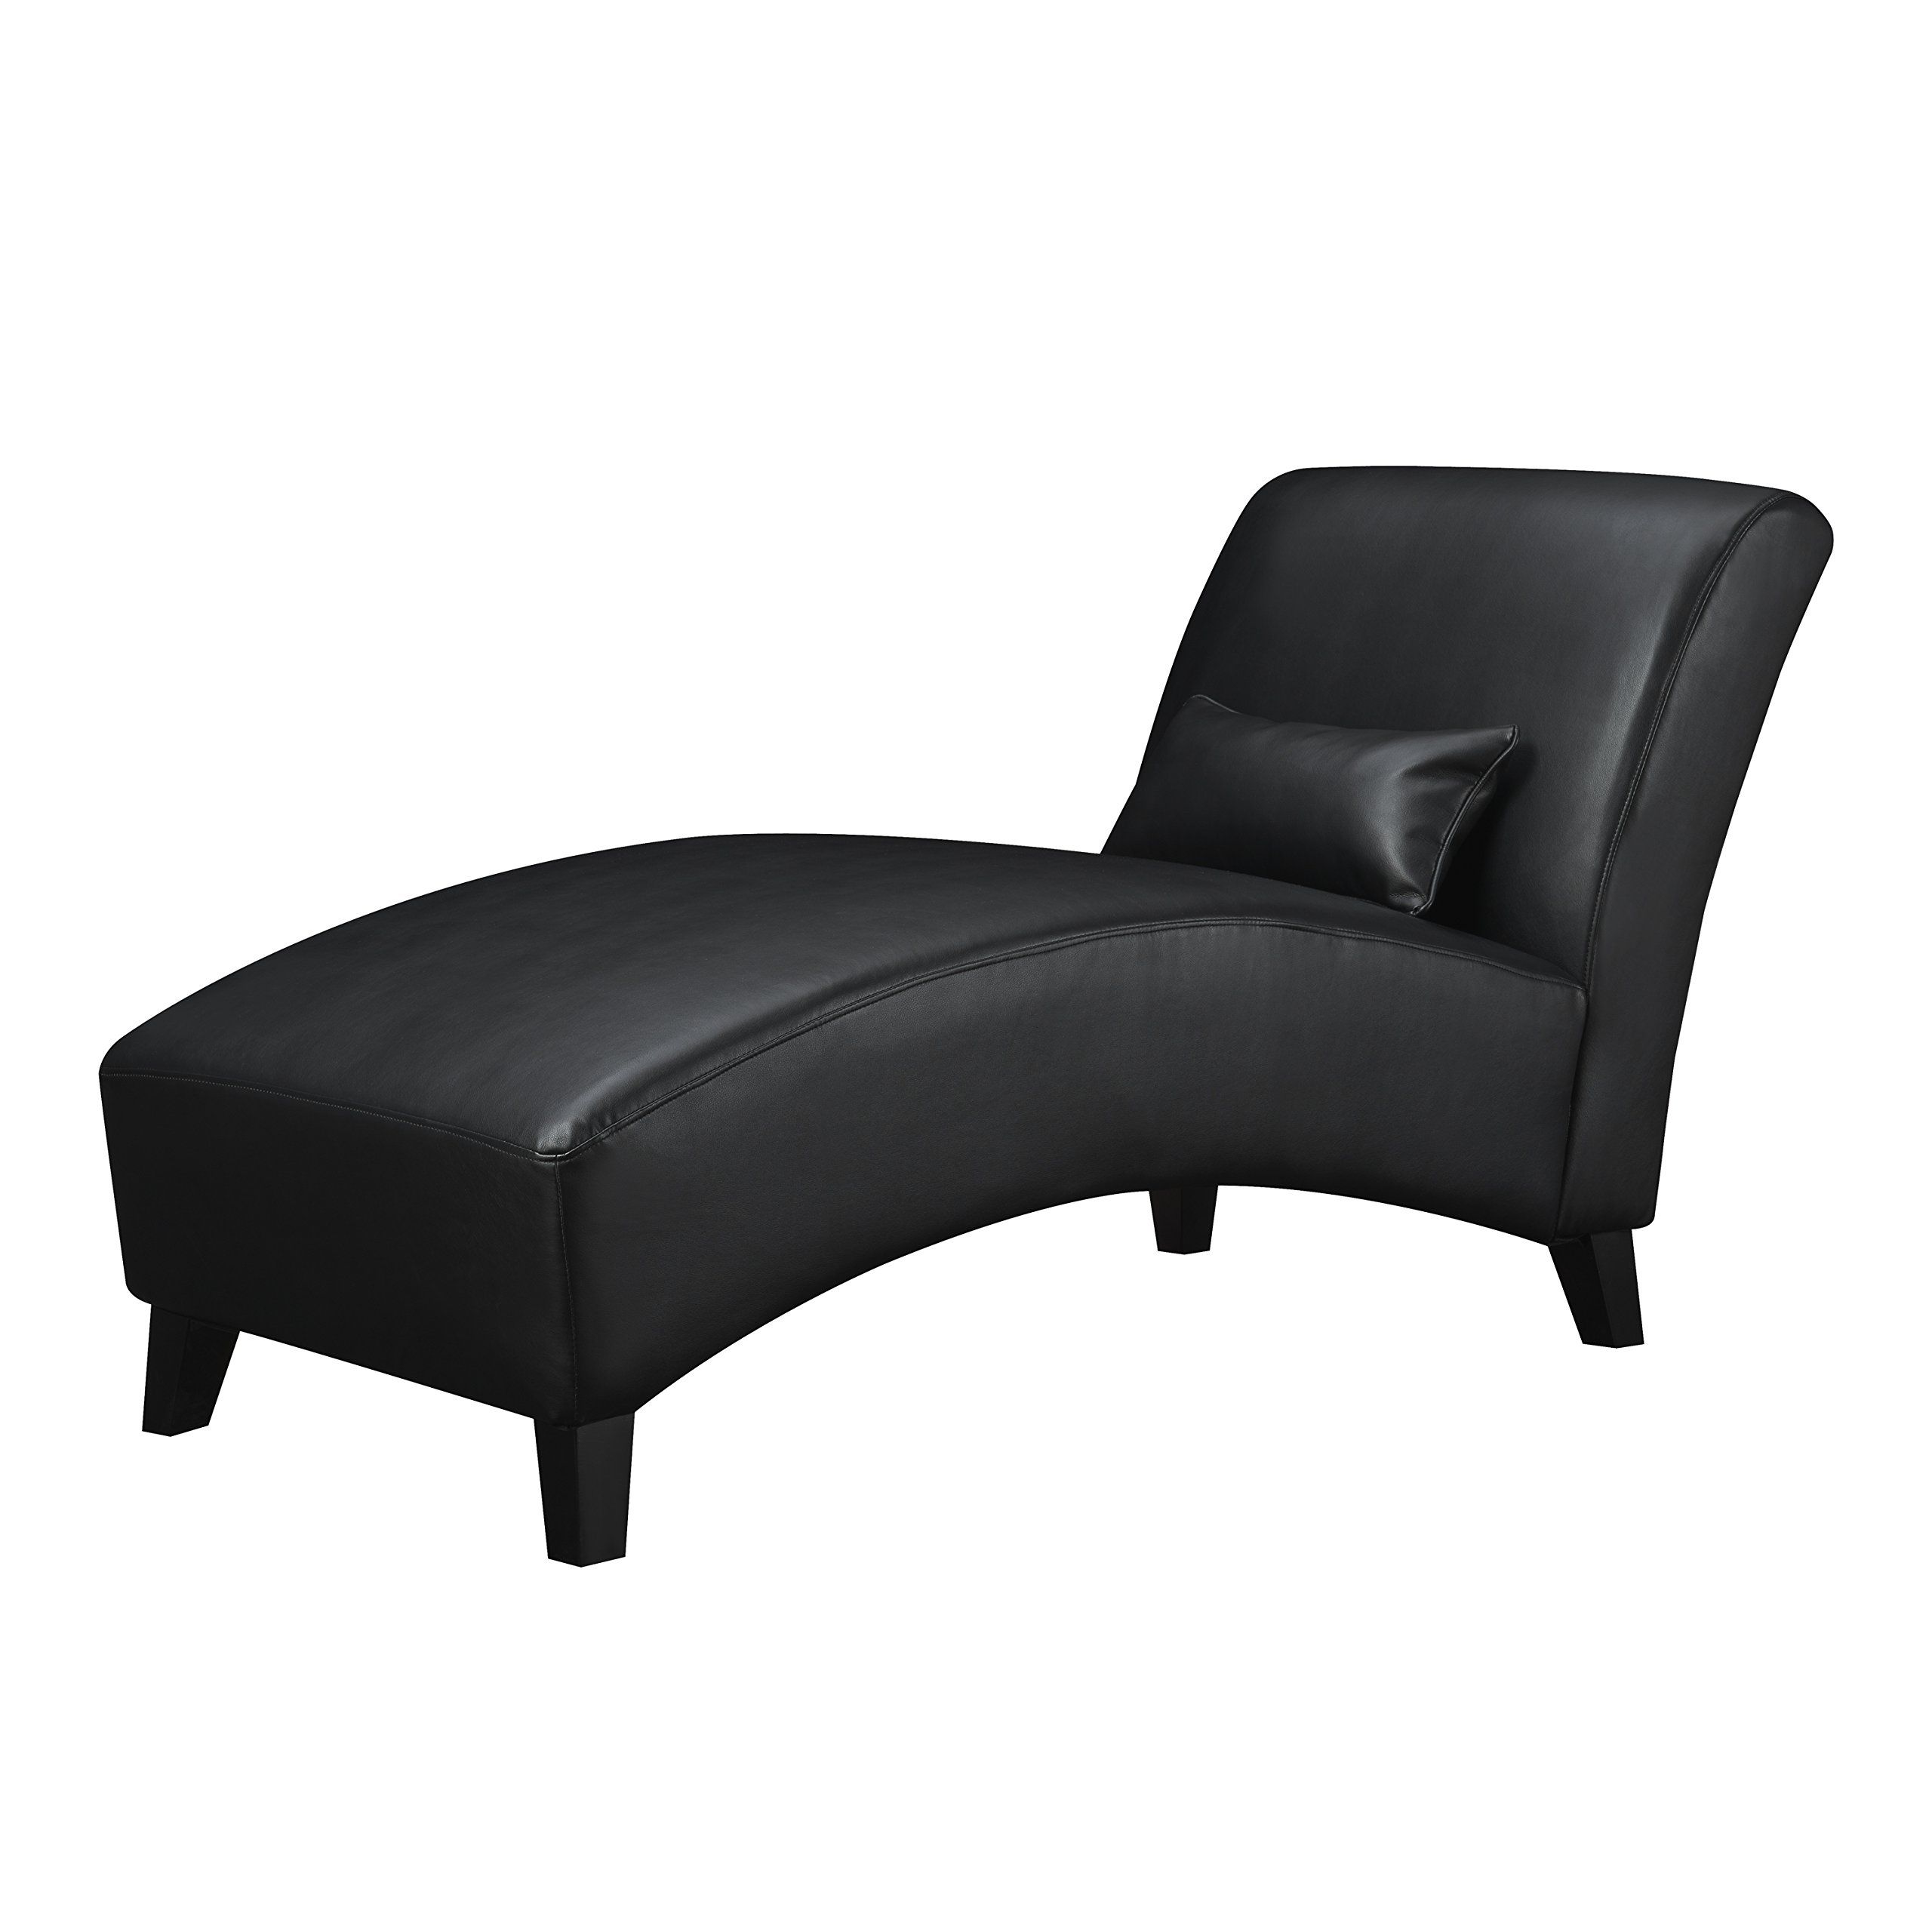 Newest Black Chaises Regarding Best Rated In Chaise Lounges & Helpful Customer Reviews – Amazon (View 12 of 15)